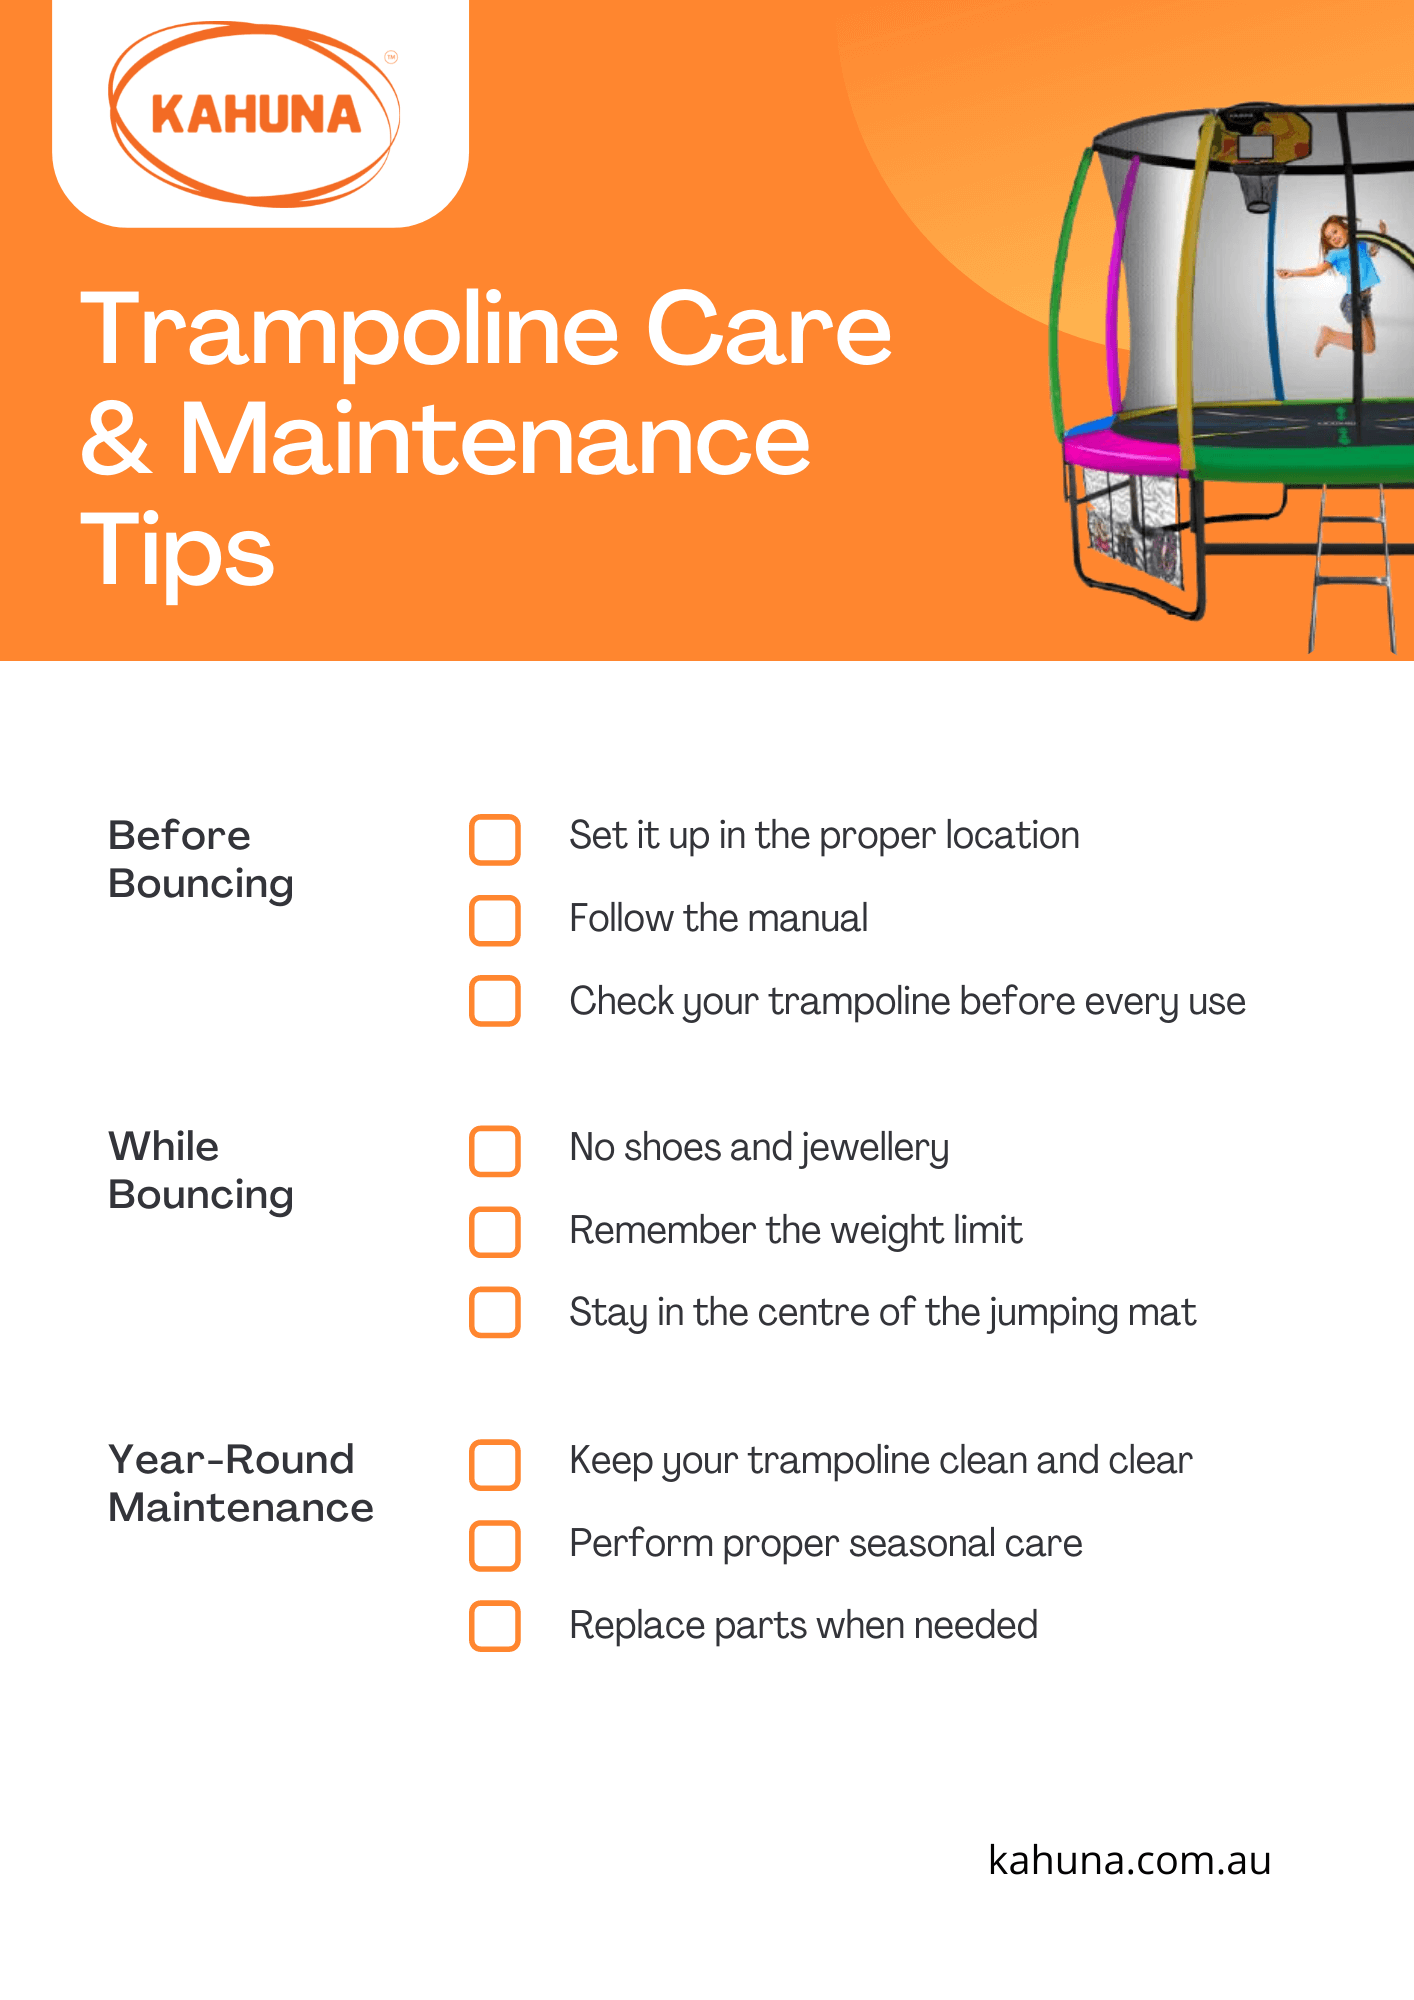 9 trampoline care and maintenance tips